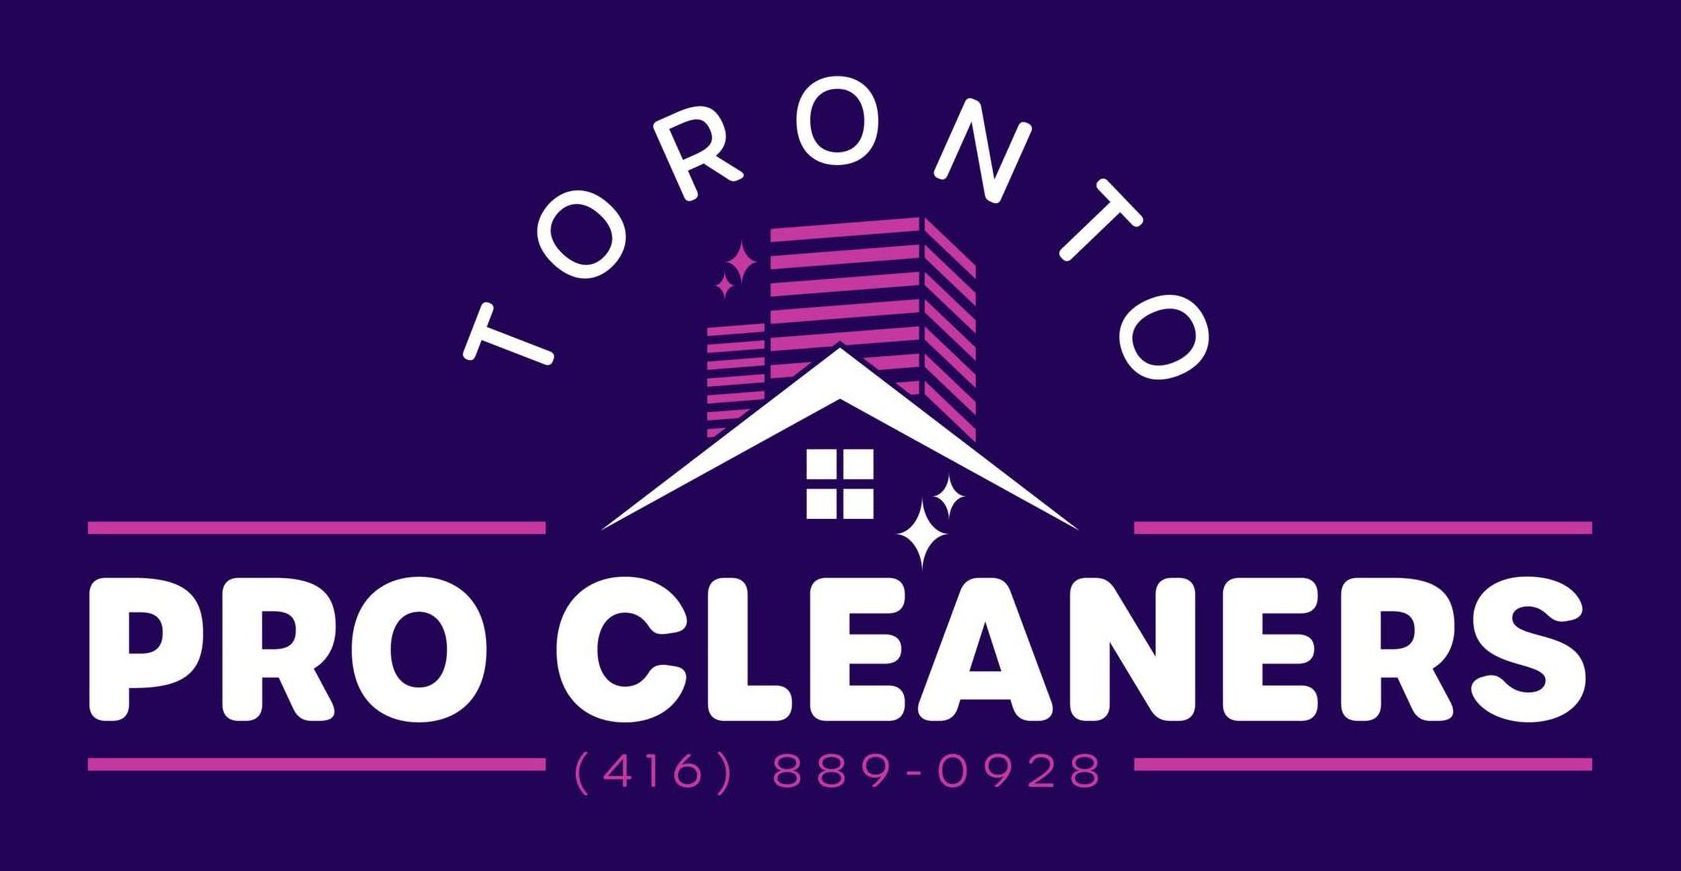 A logo for toronto pro cleaners on a purple background